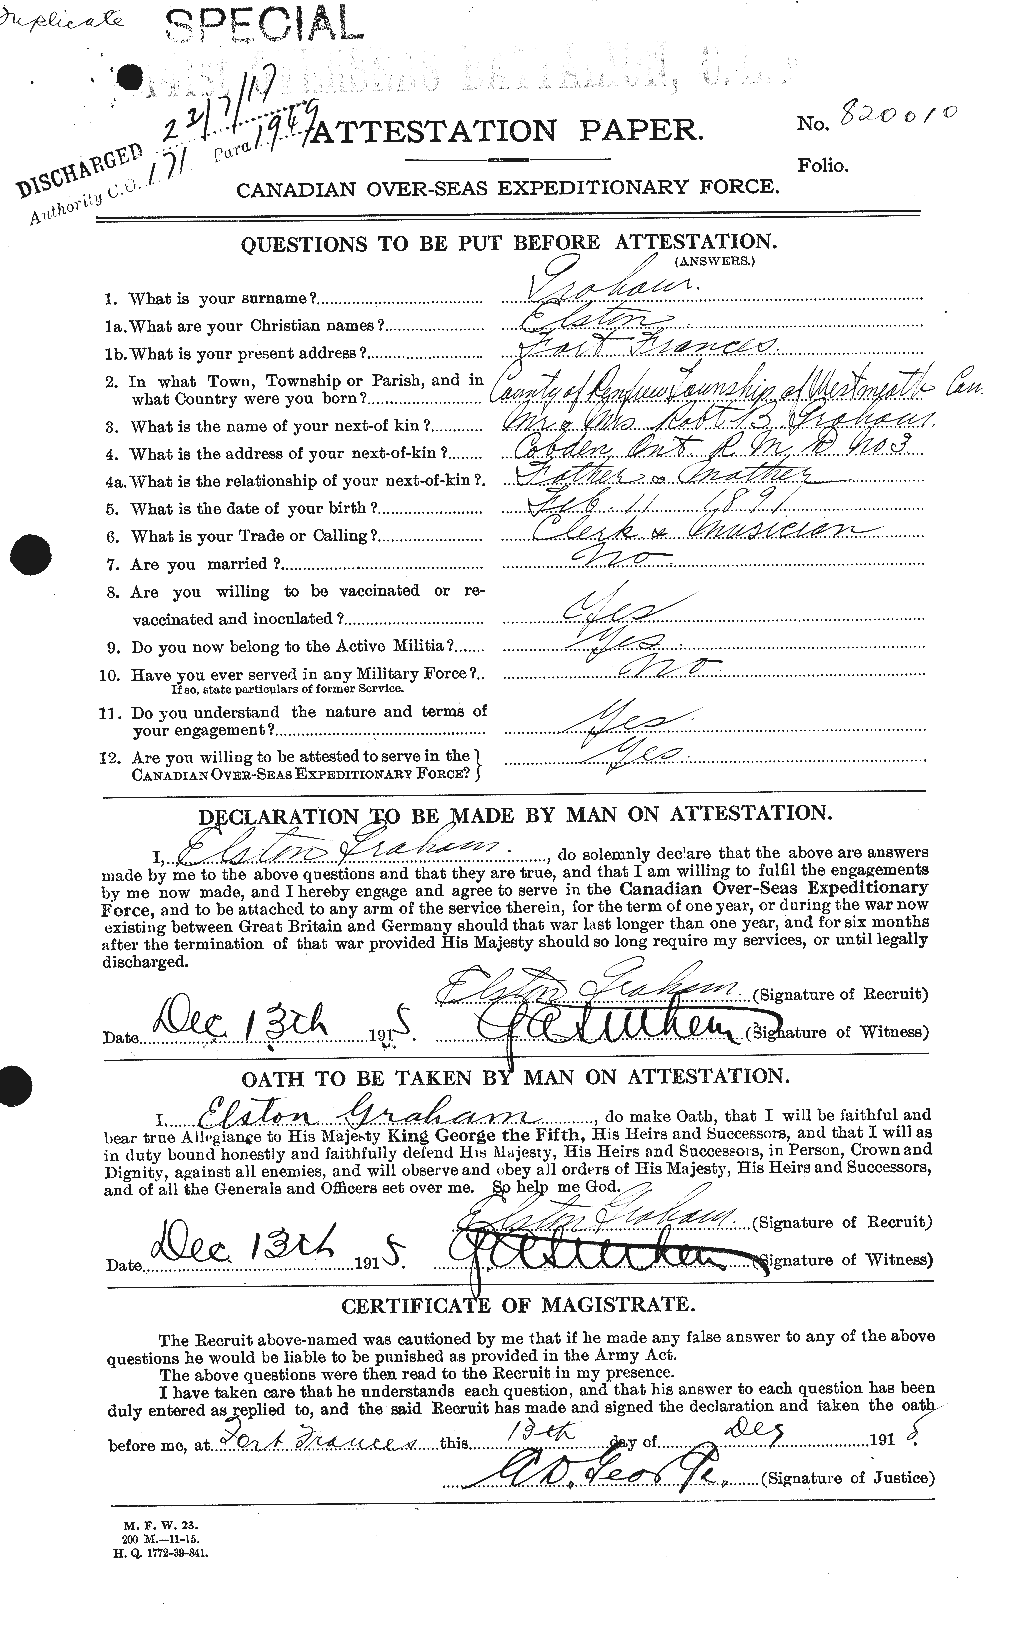 Personnel Records of the First World War - CEF 357550a